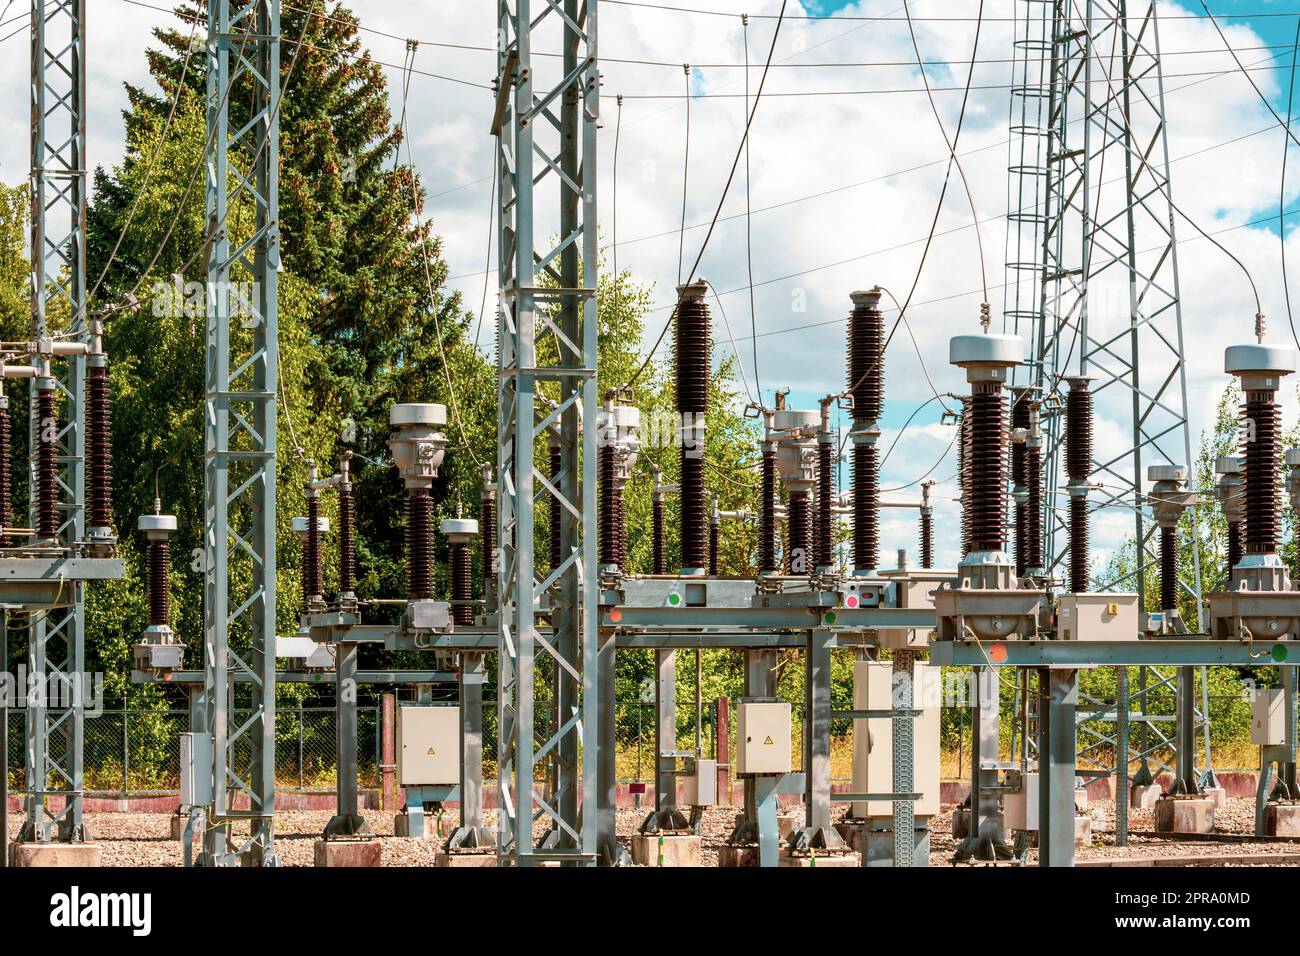 Distribution of electric energy at a big substation with lots power lines Stock Photo